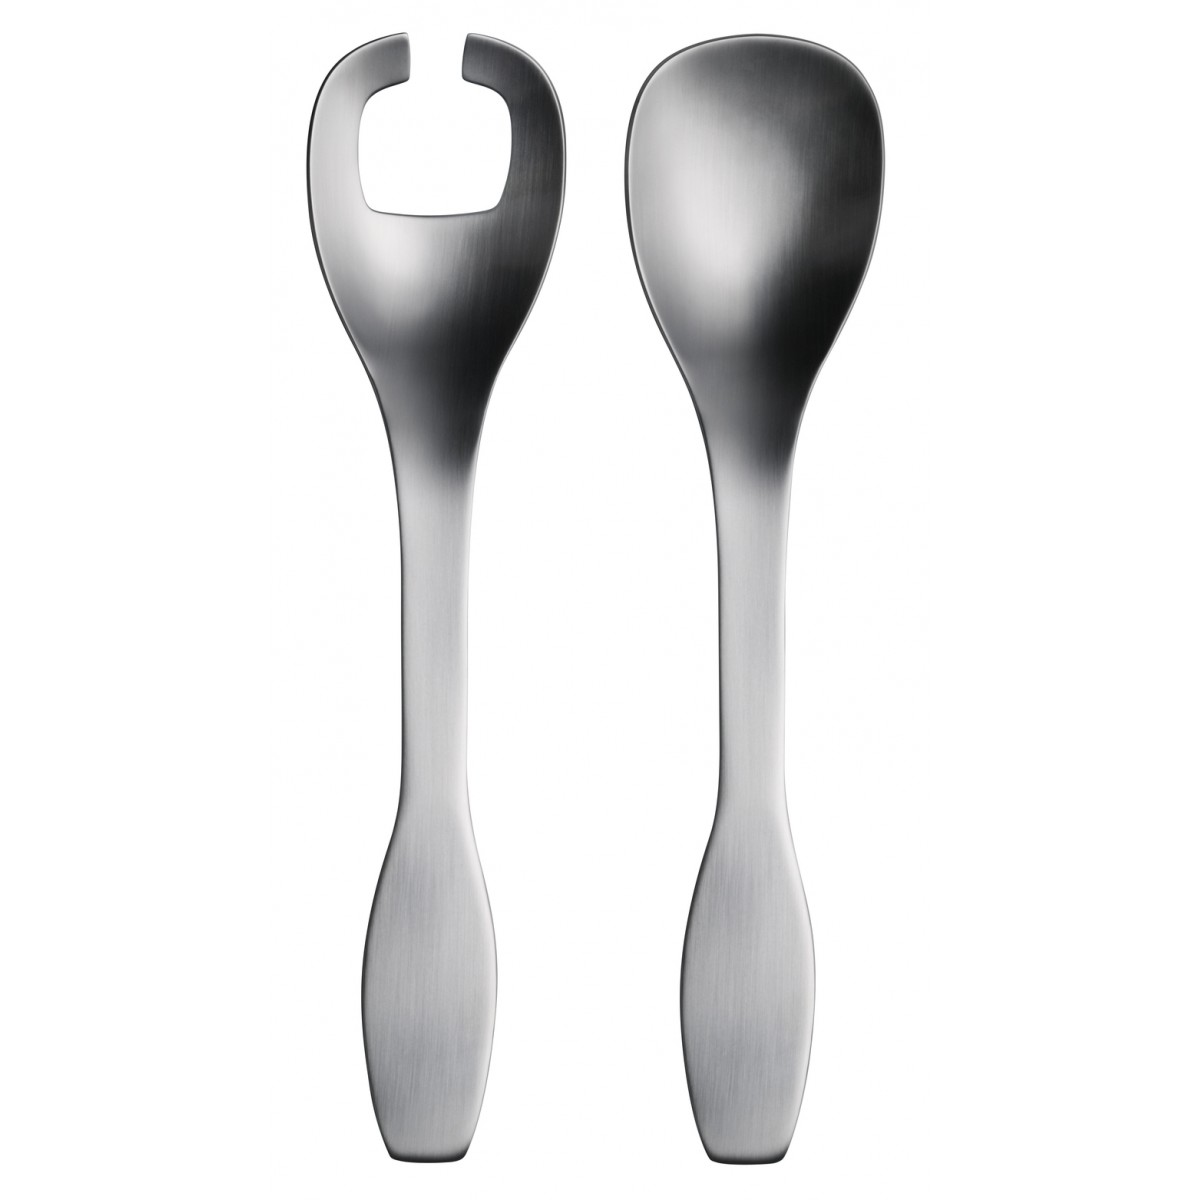 2 x Serving spoon - Collective Tools